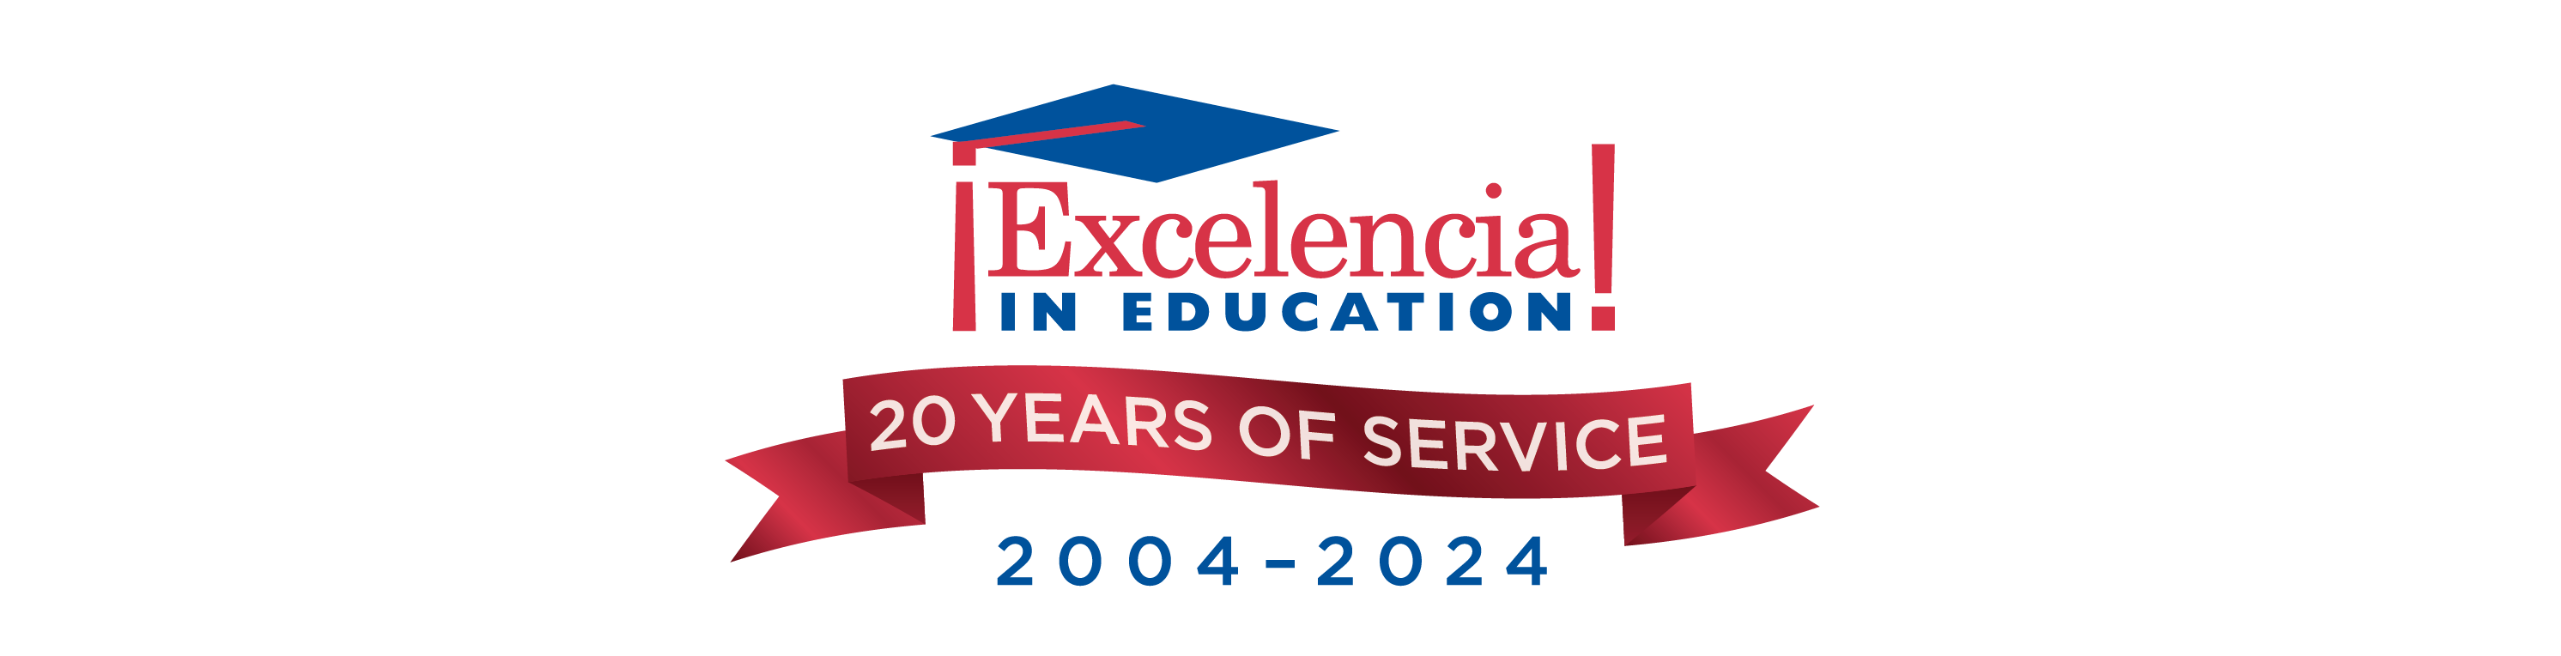 Excelencia in Education 20 years of Service Logo